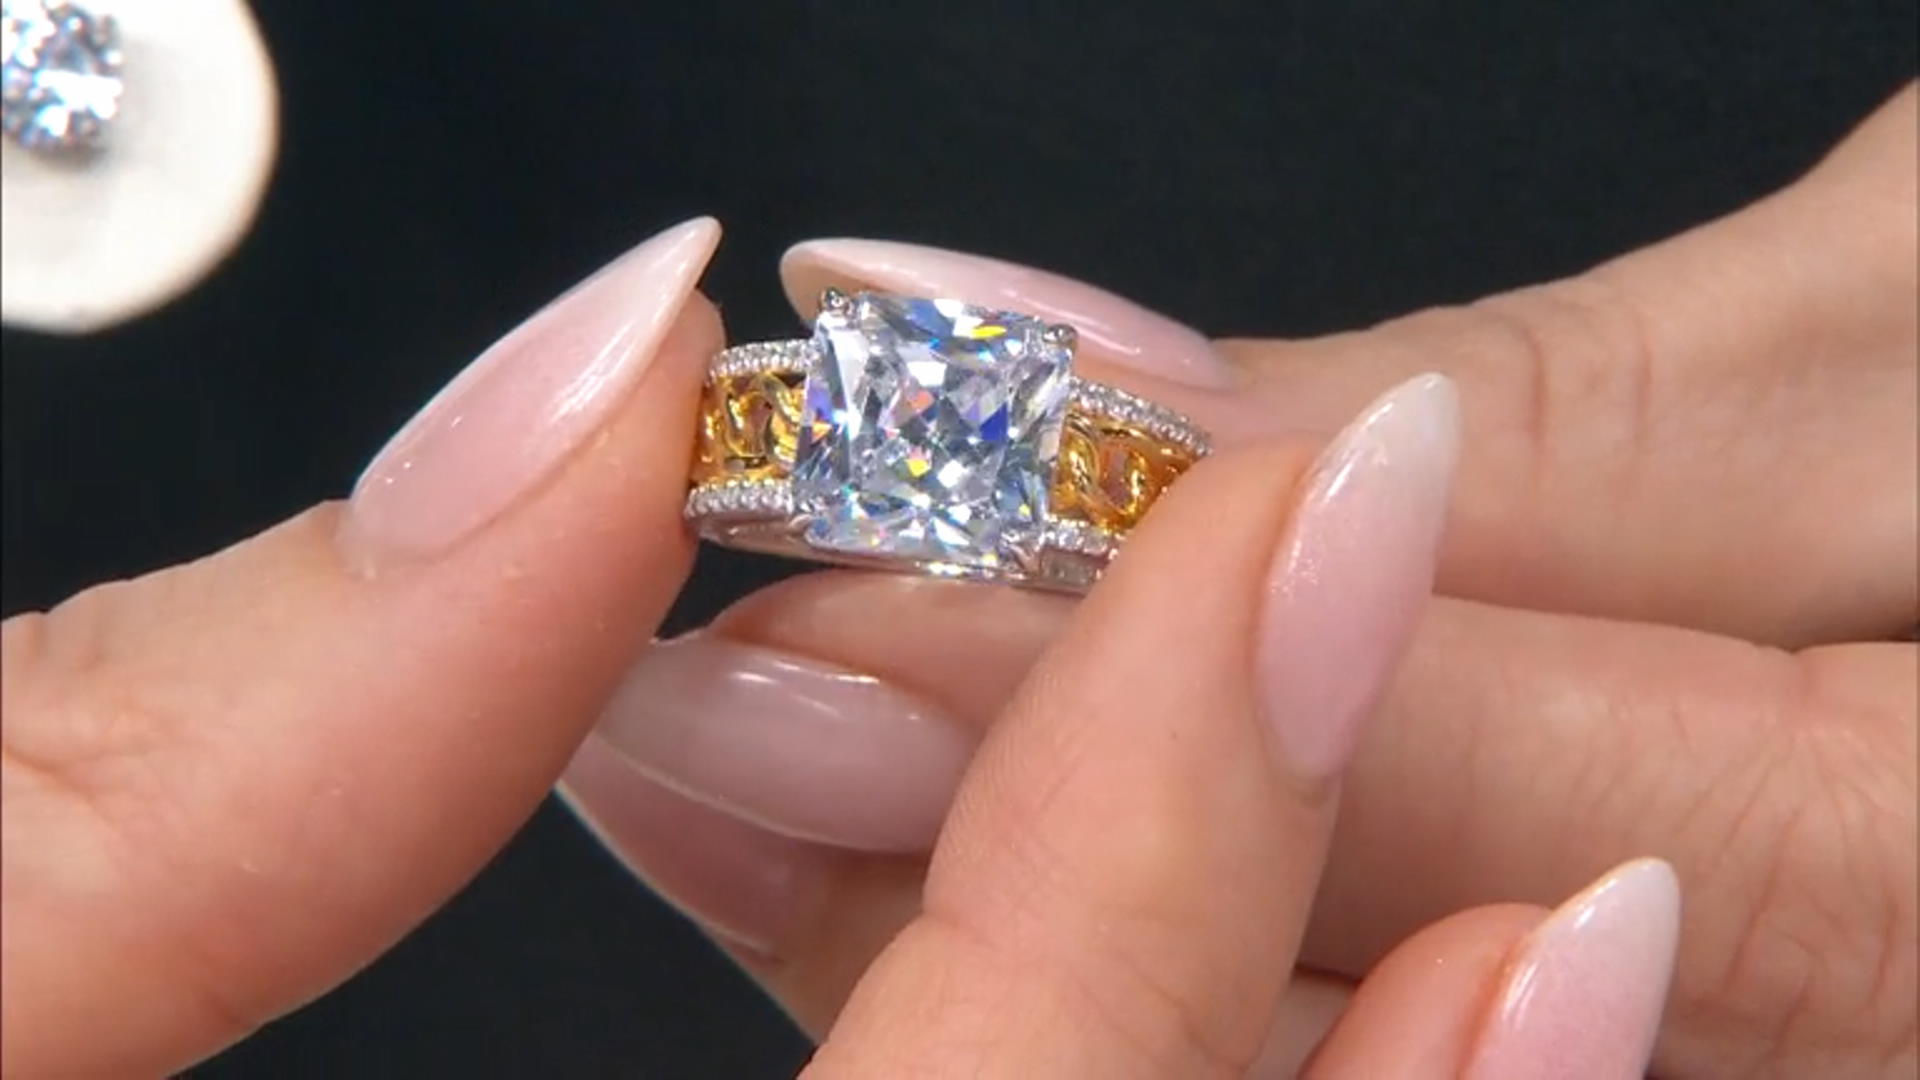 White Cubic Zirconia Rhodium And 18k Yellow Gold Over Sterling Silver Ring 7.52ctw Video Thumbnail